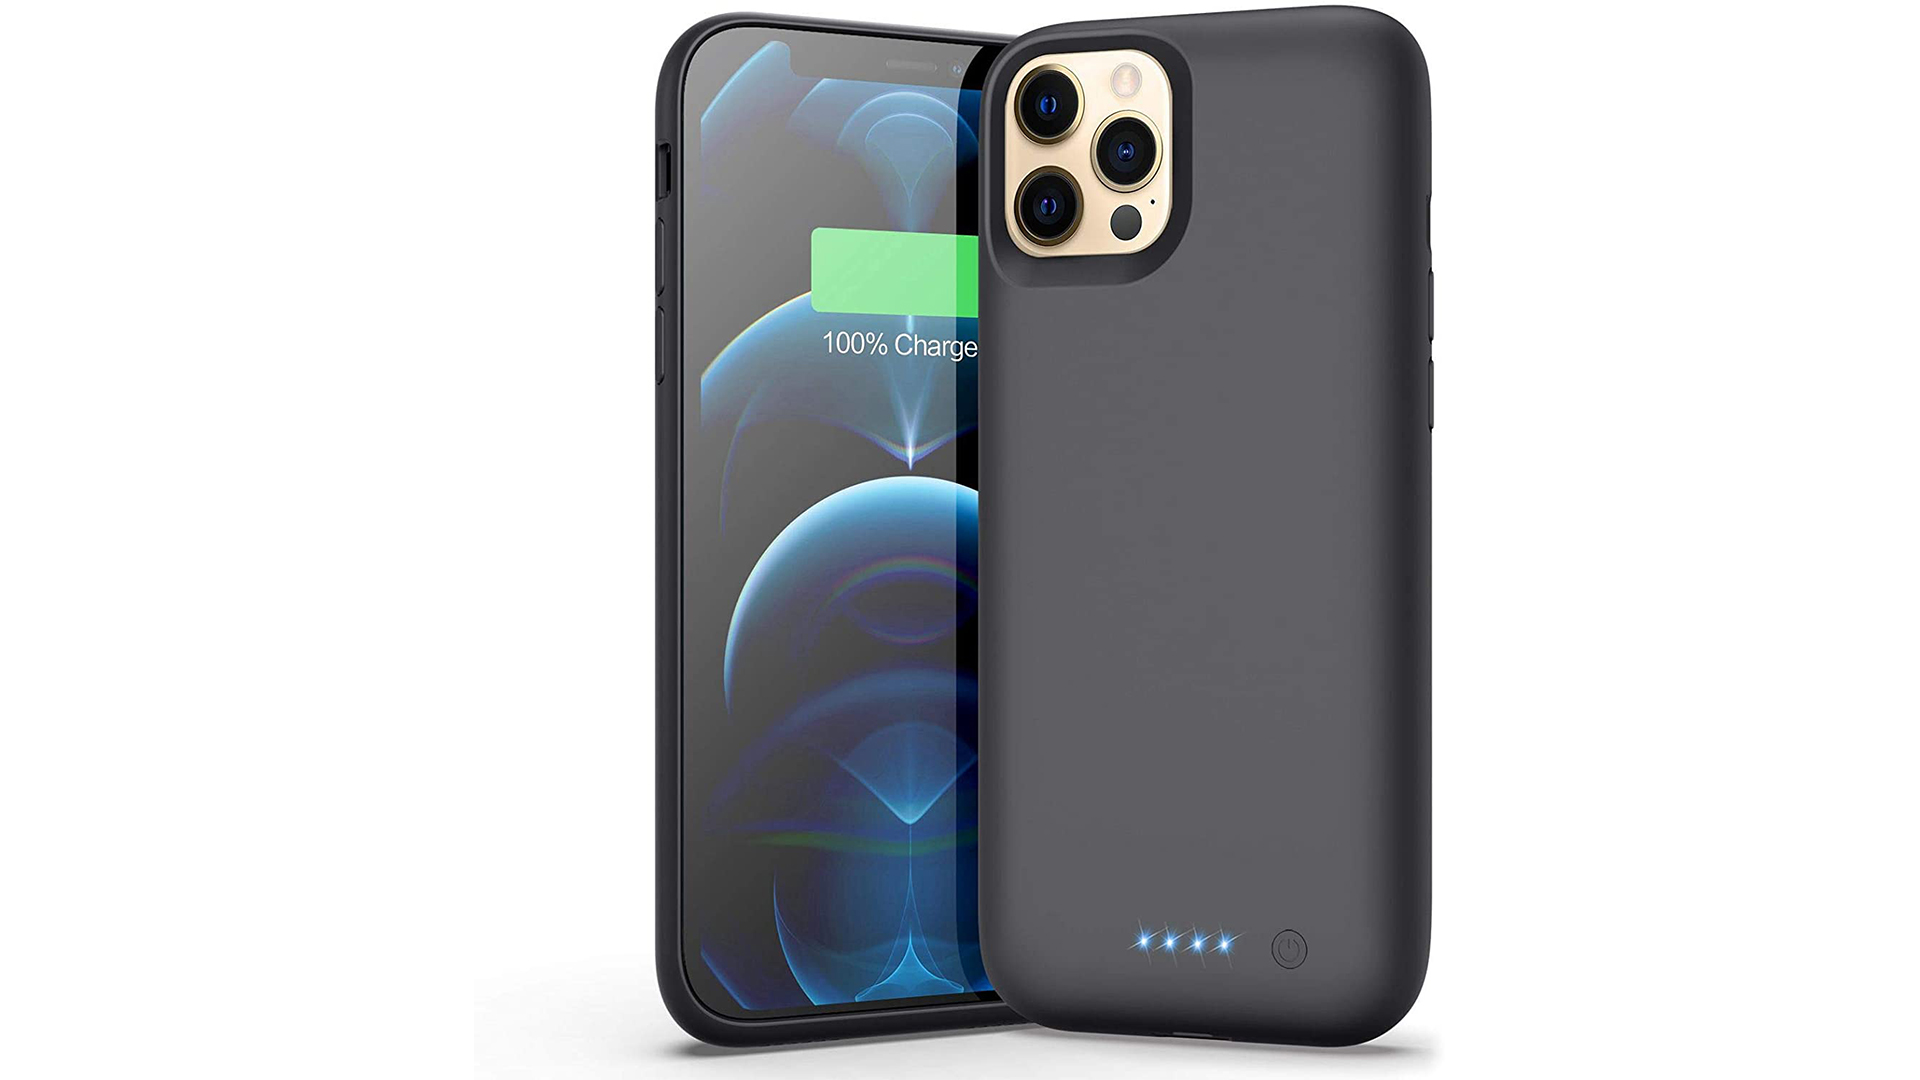 best iPhone 12 Pro Max battery case: Aonimi front and back view